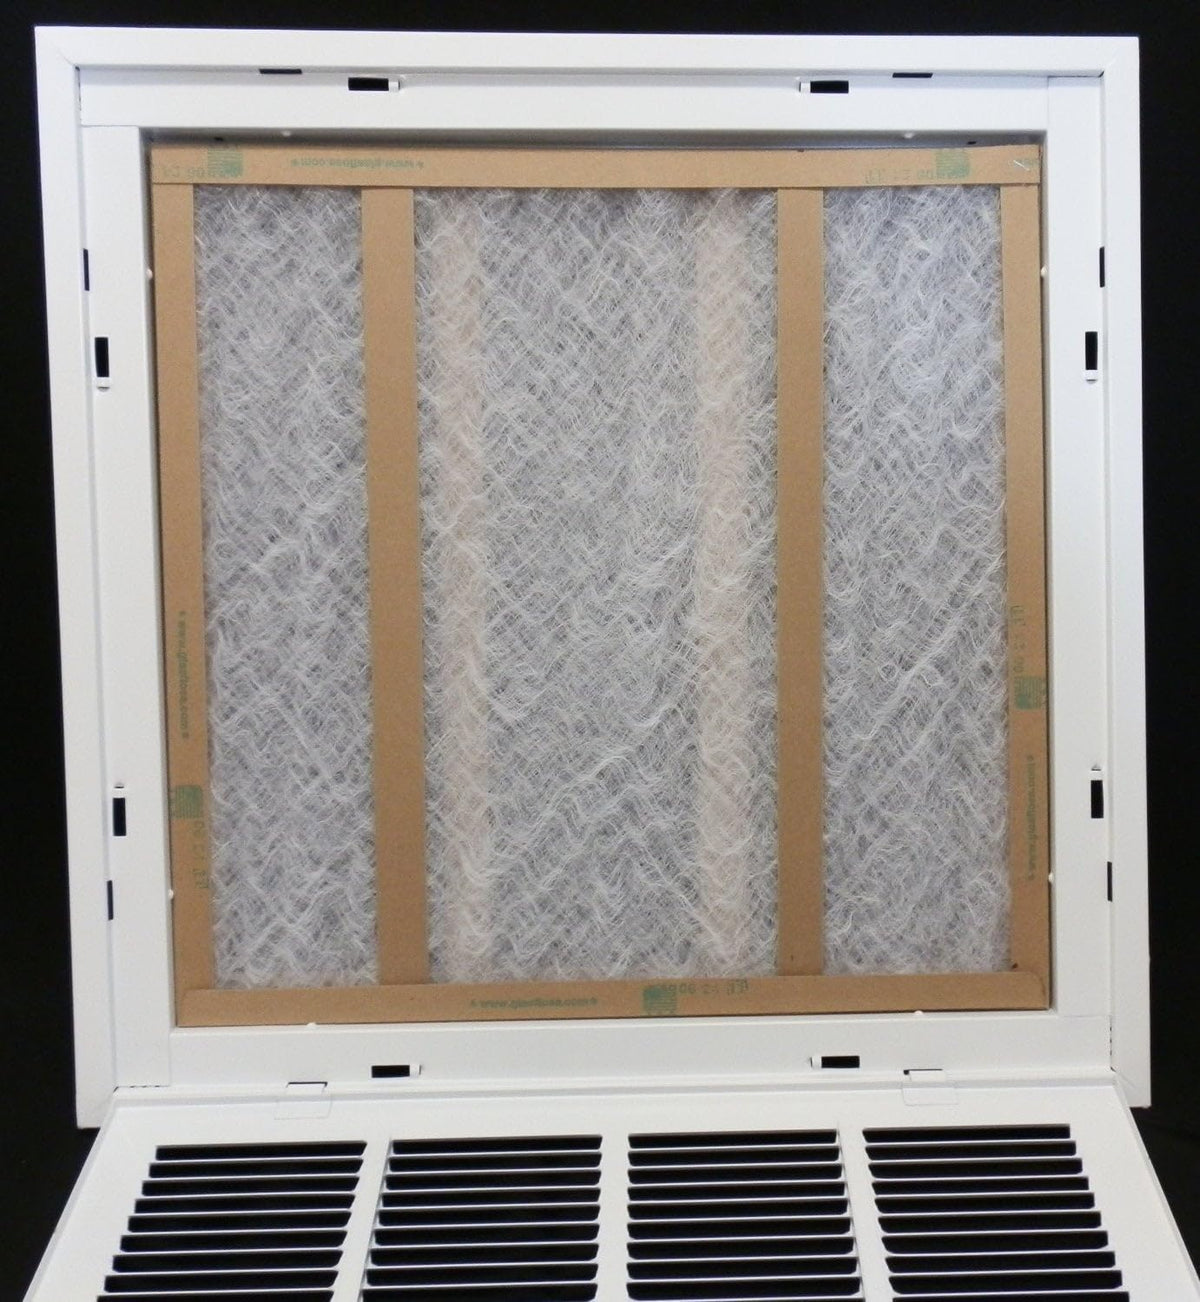 20&quot; X 16&quot; Steel Return Air Filter Grille for 1&quot; Filter - Fixed Hinged - [Outer Dimensions: 22 5/8&quot; X 18 5/8&quot;]